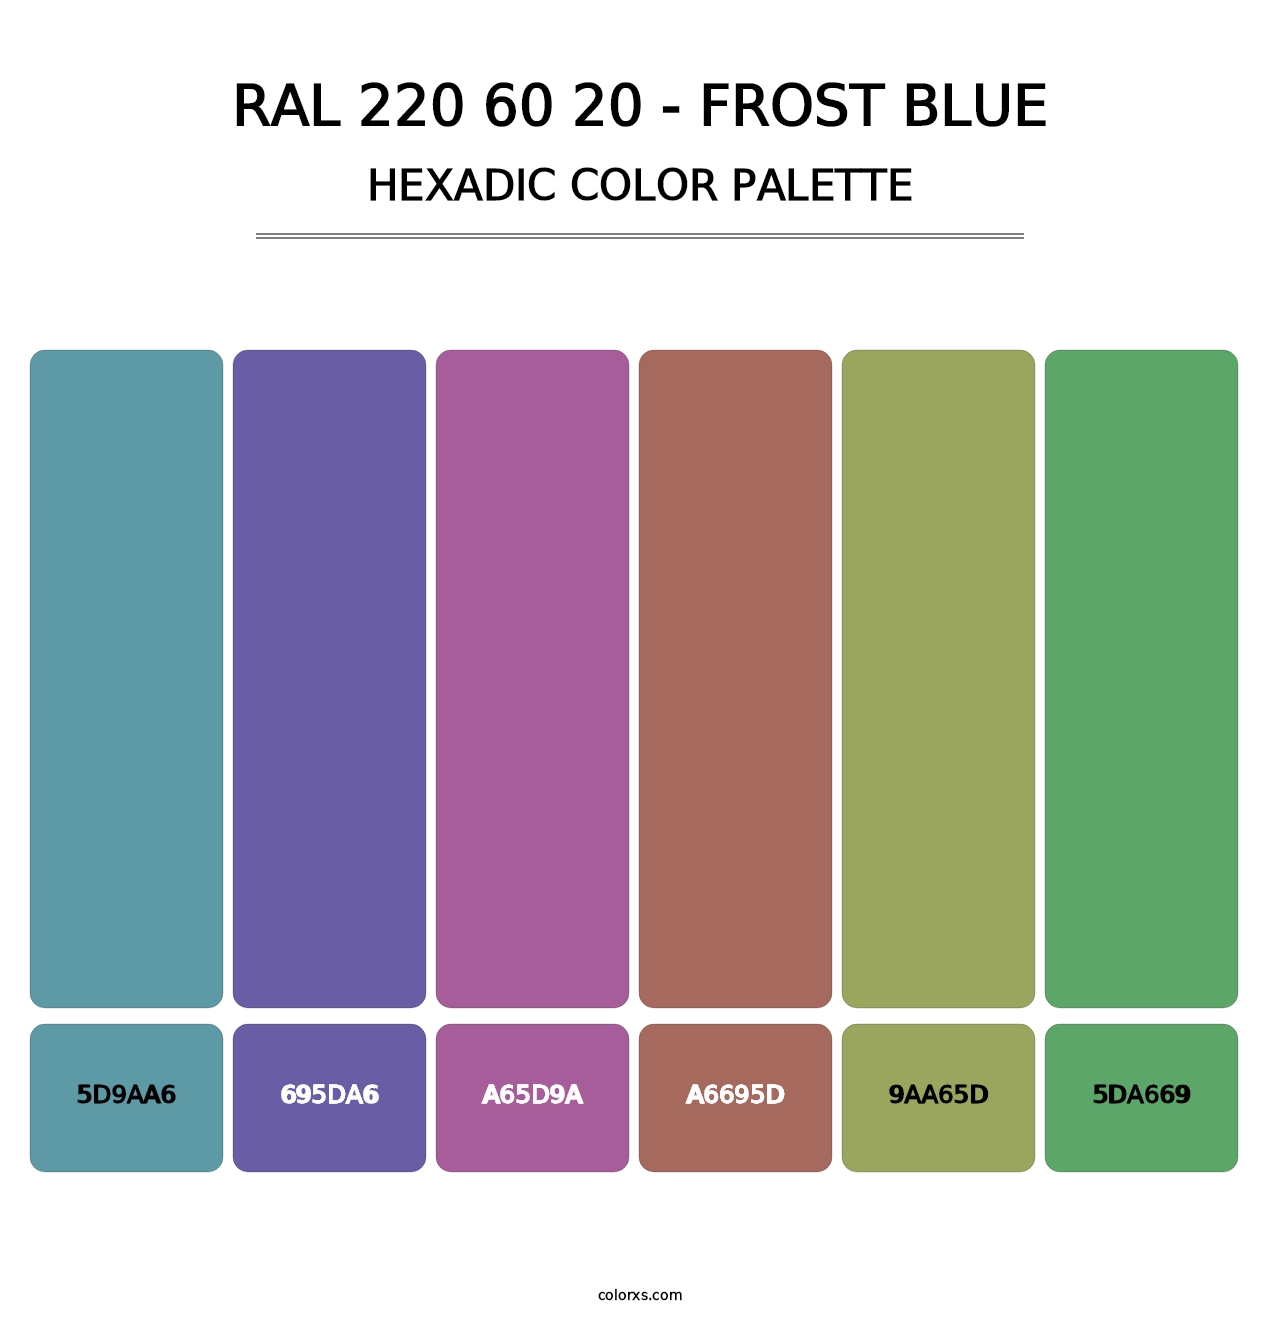 RAL 220 60 20 - Frost Blue - Hexadic Color Palette